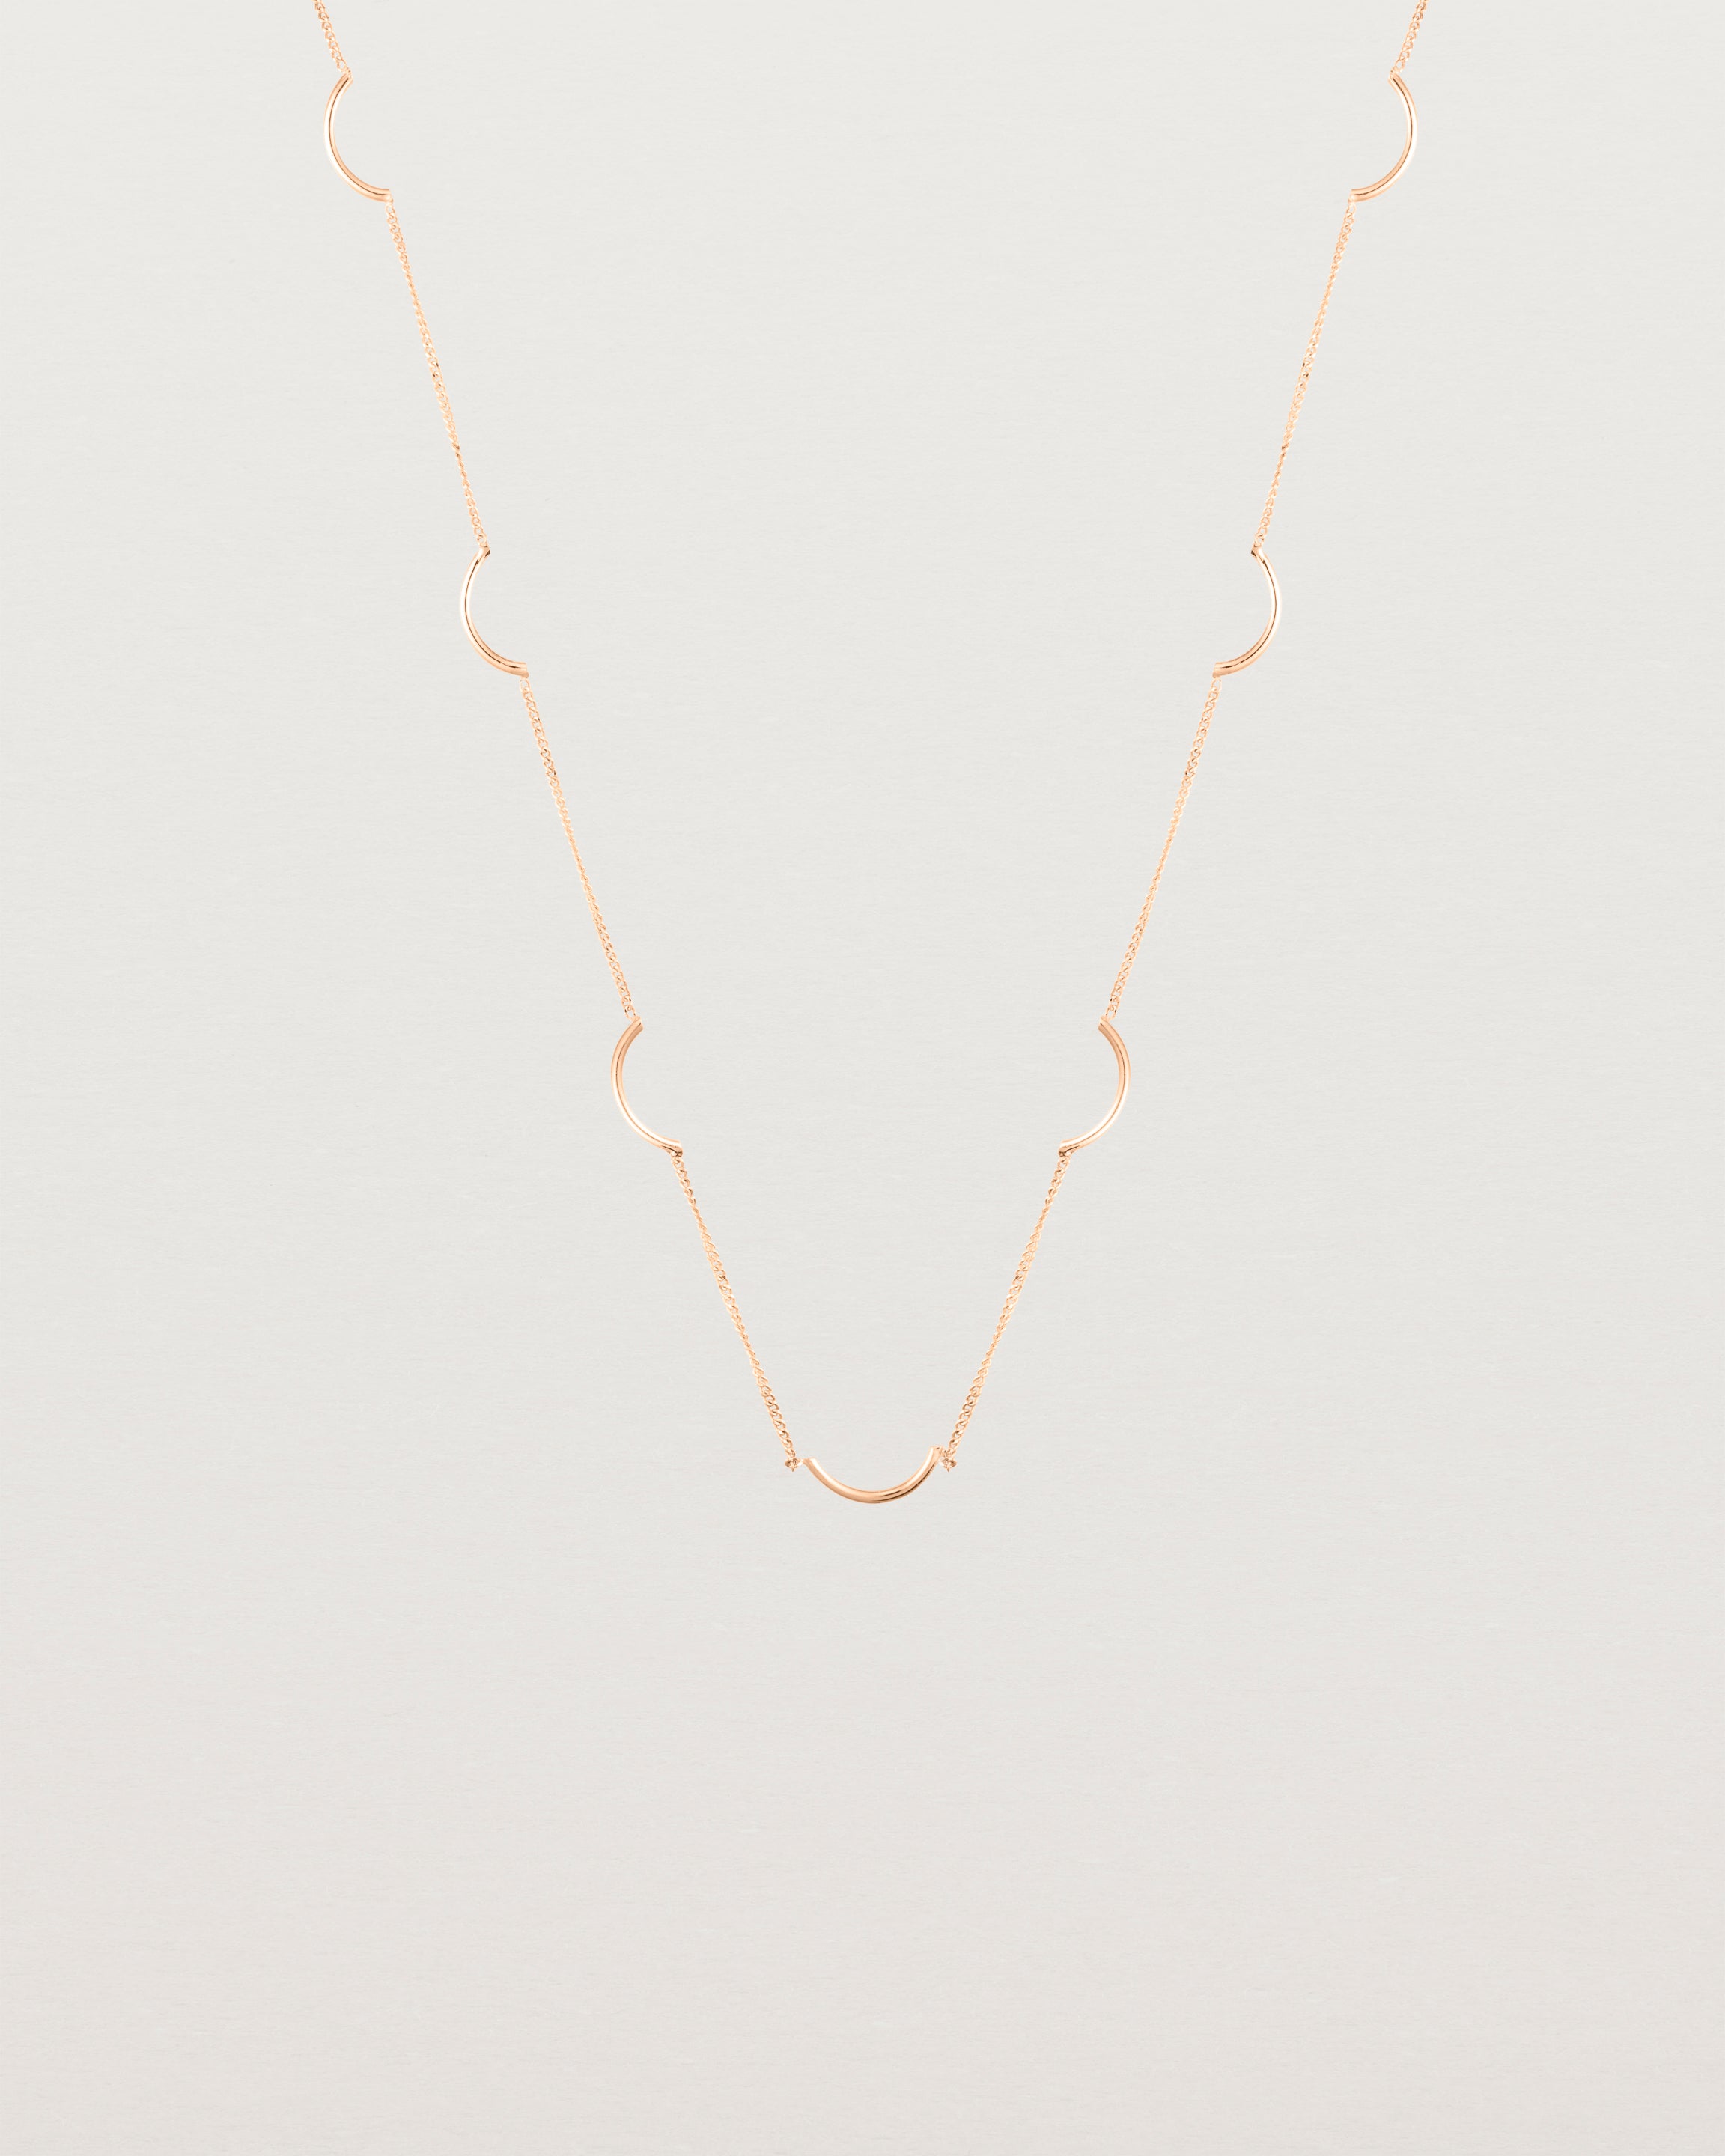 The Lai Chain Necklace in rose gold.